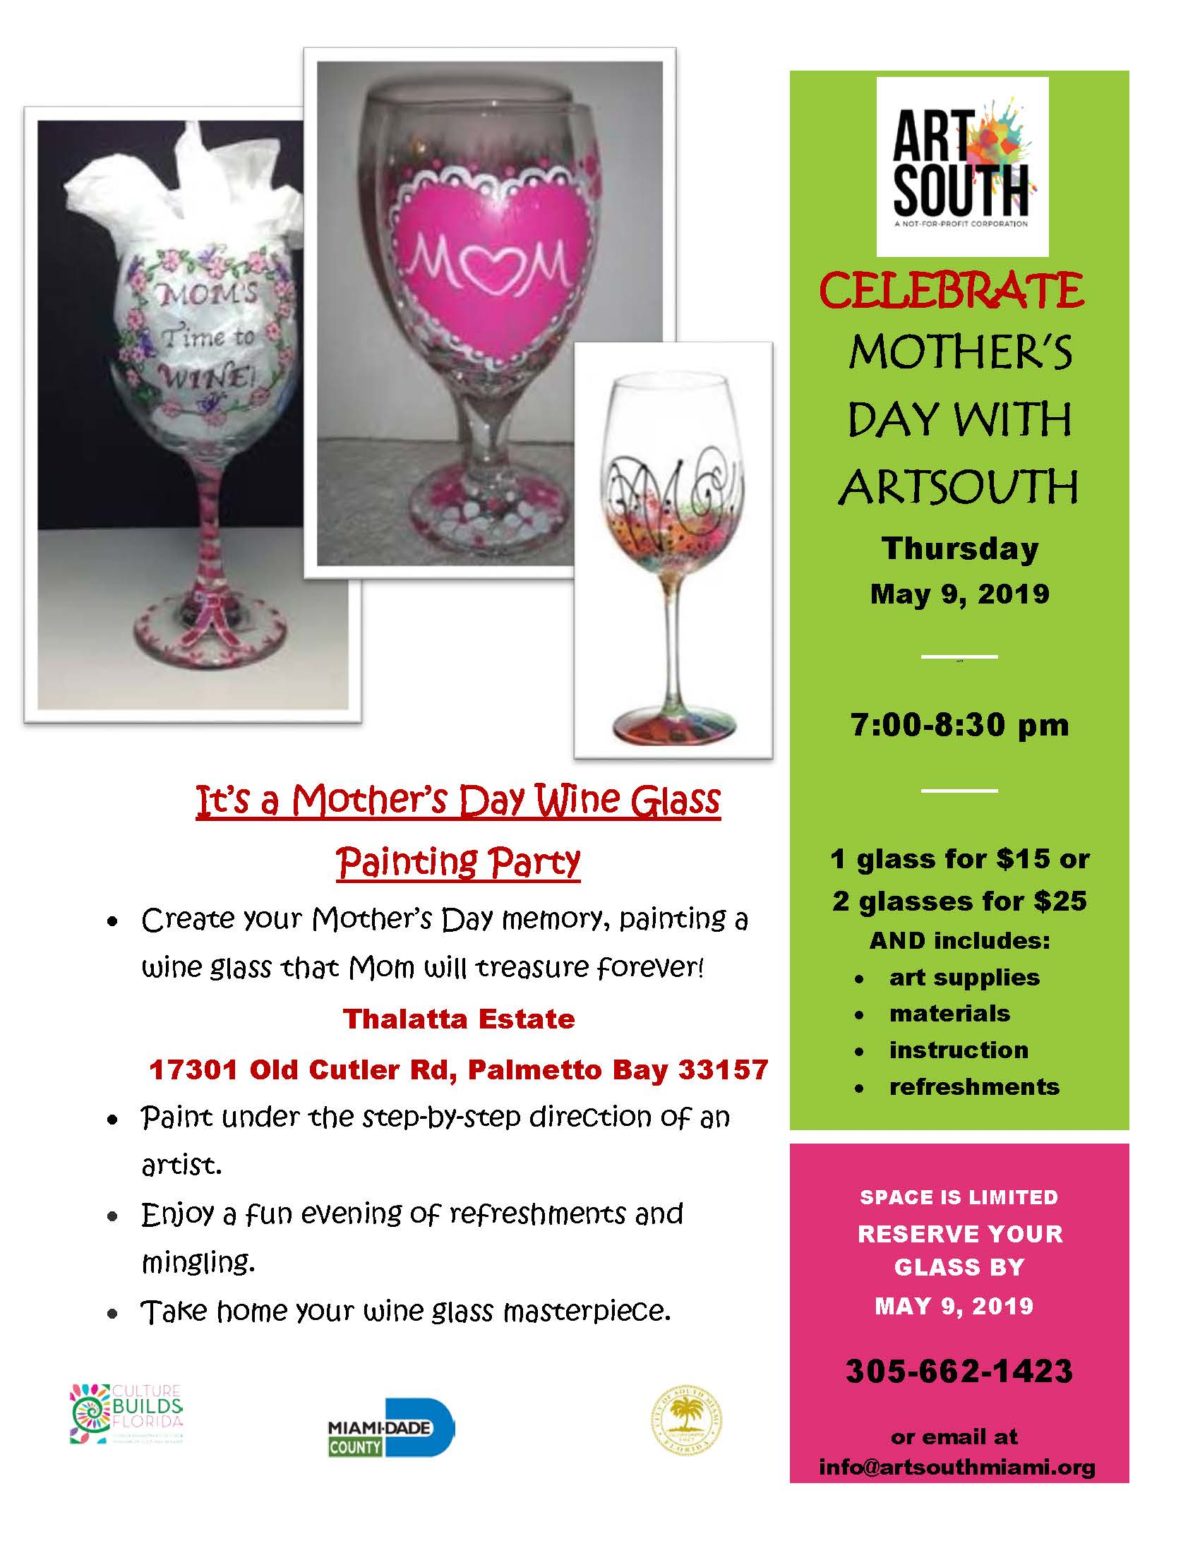 ArtSouth Mother’s Day Wine Glass Painting Party 2019